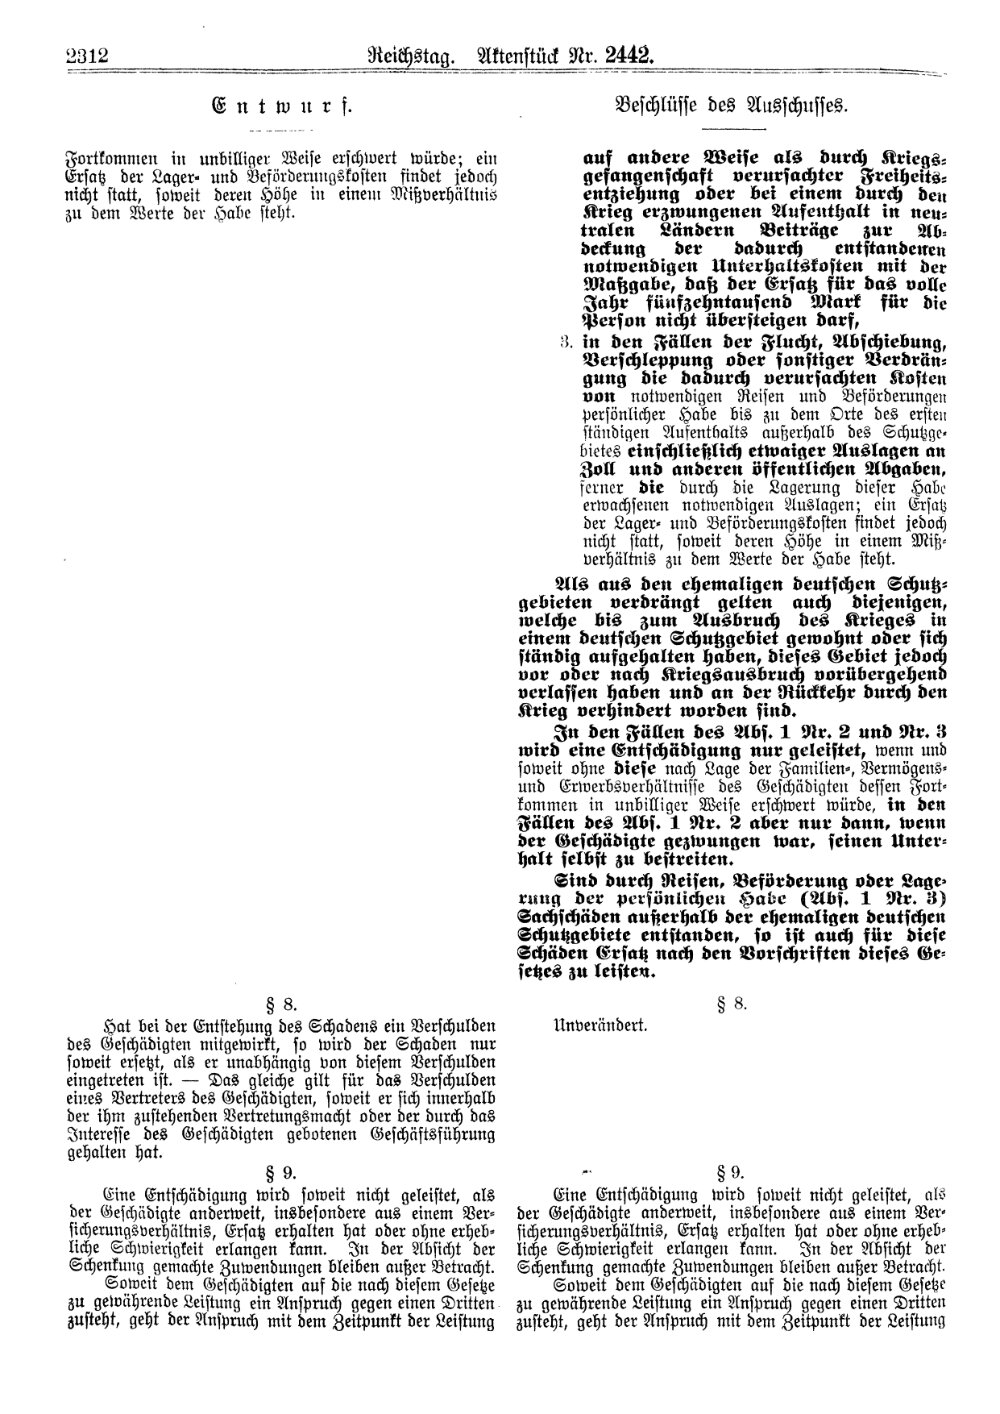 Scan of page 2312